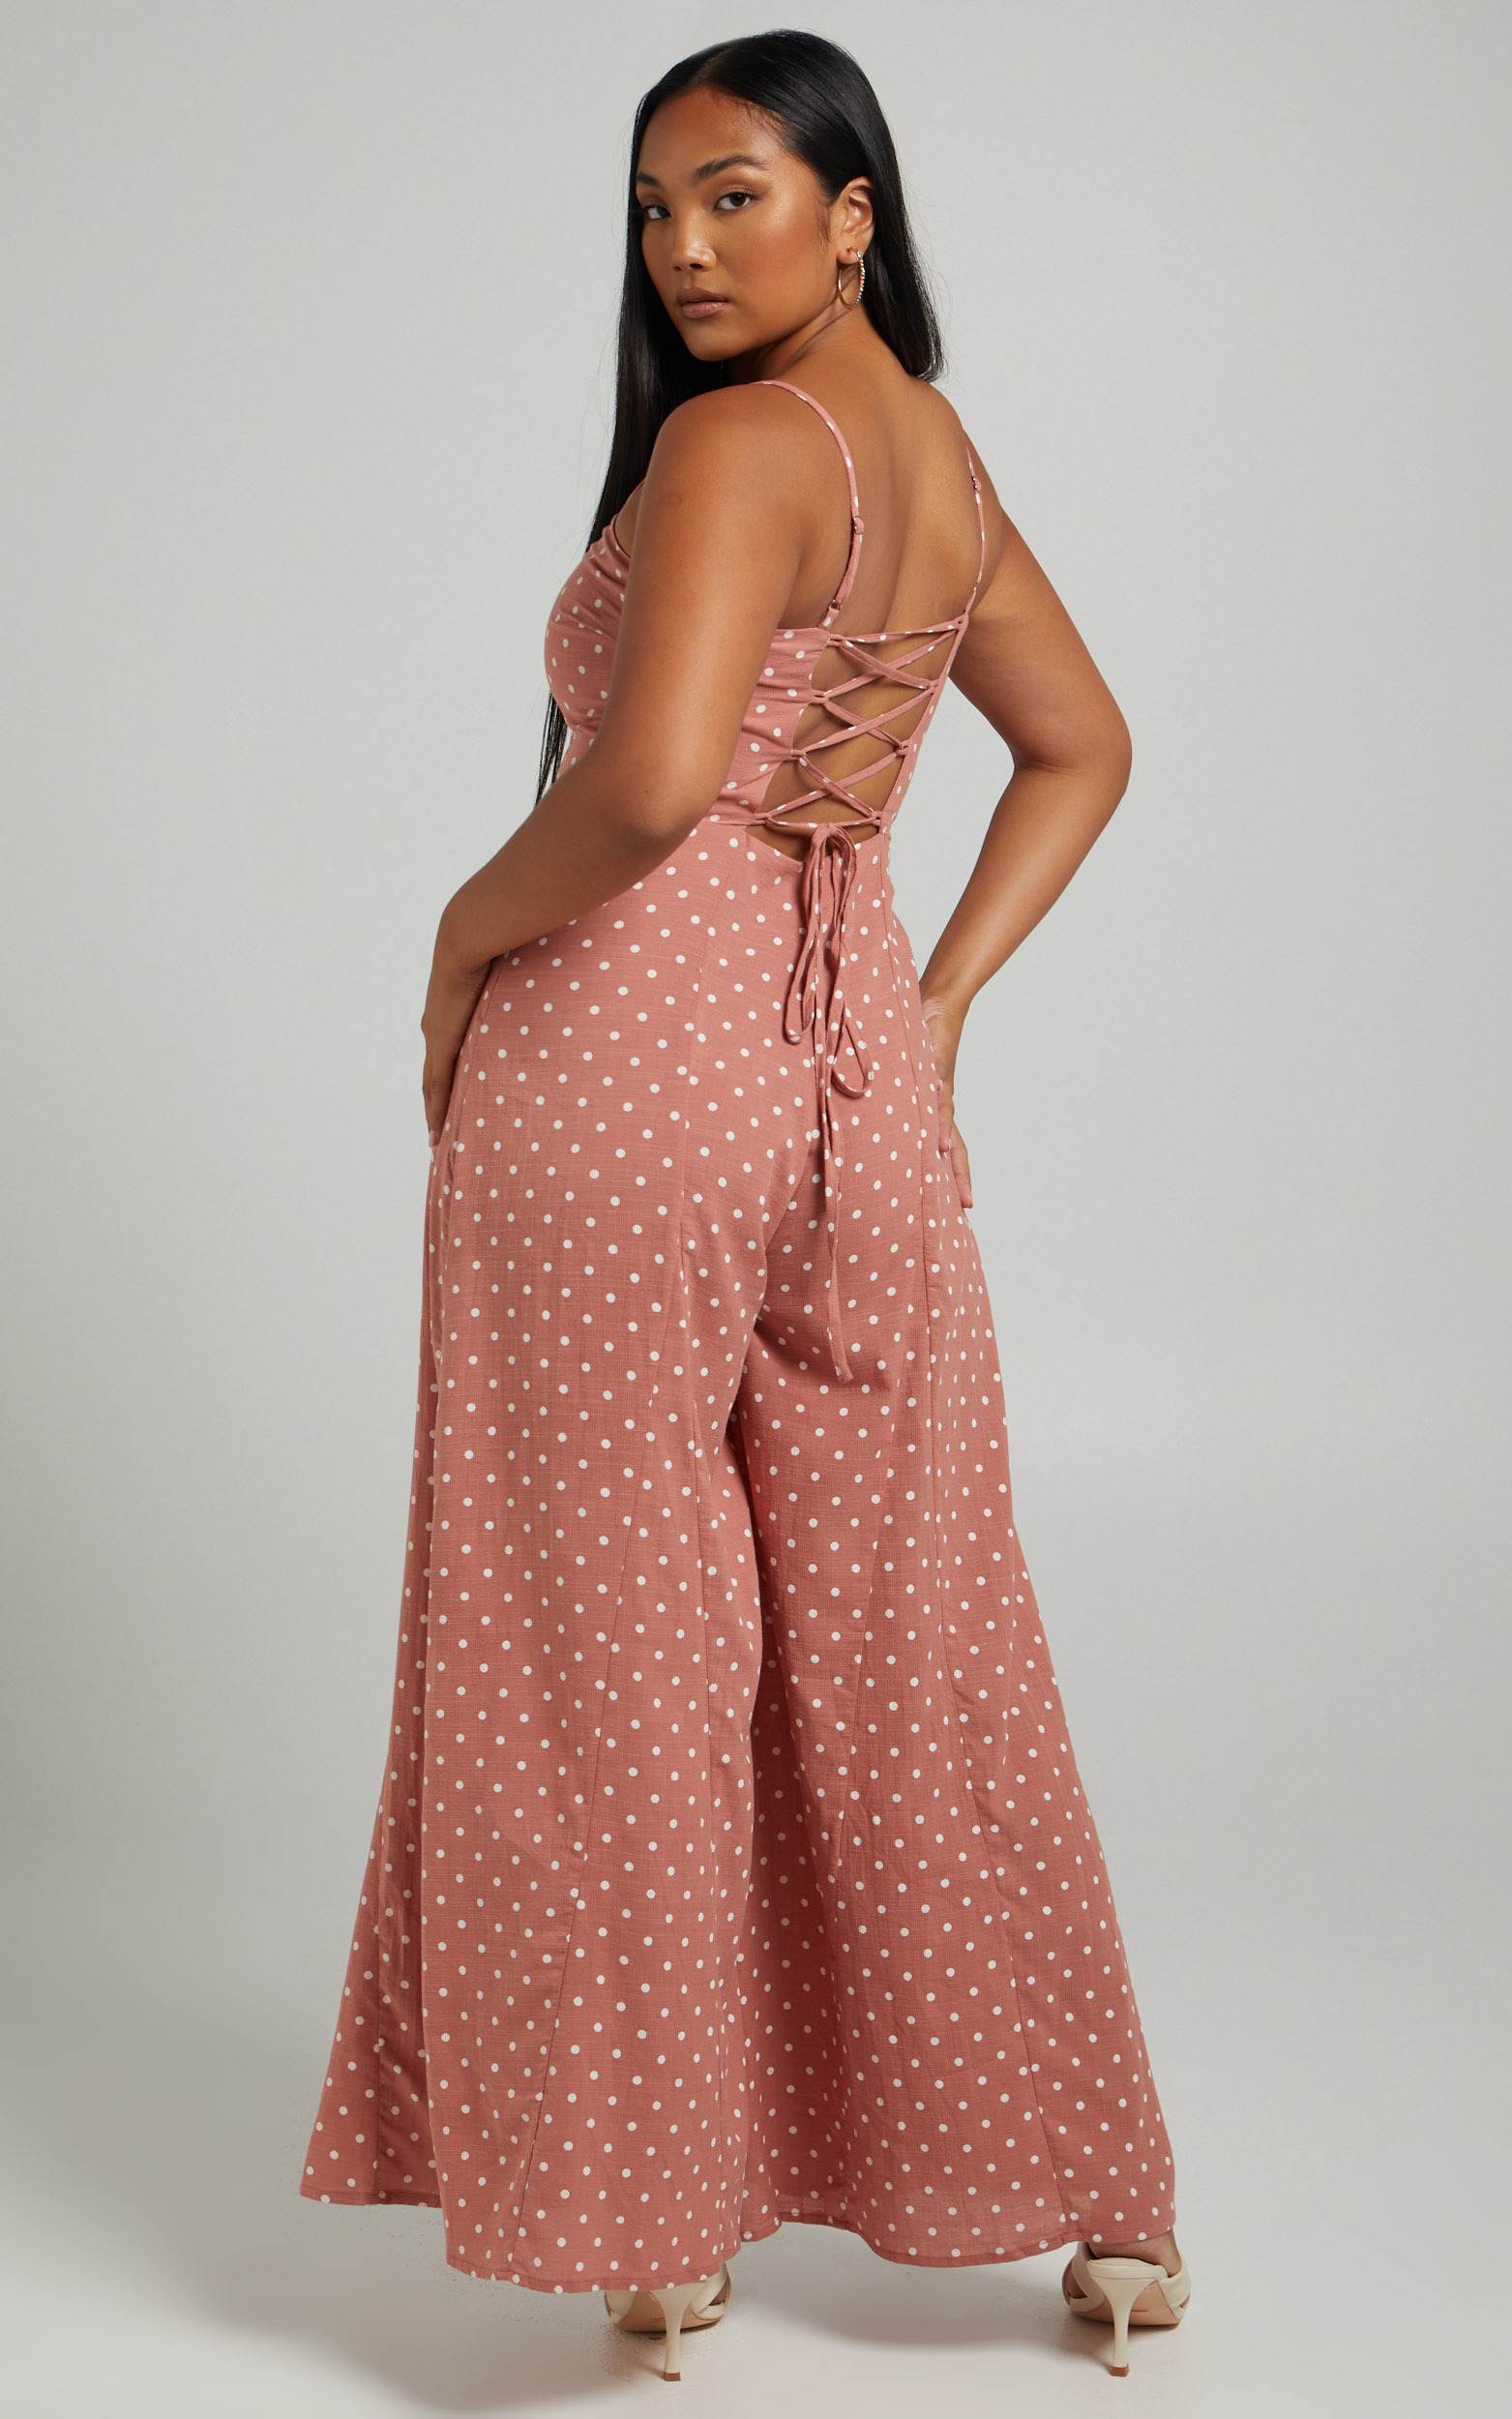 Emmie Tie Back Wide Leg Jumpsuit in Dusty Pink Spot - 06, PNK1, hi-res image number null